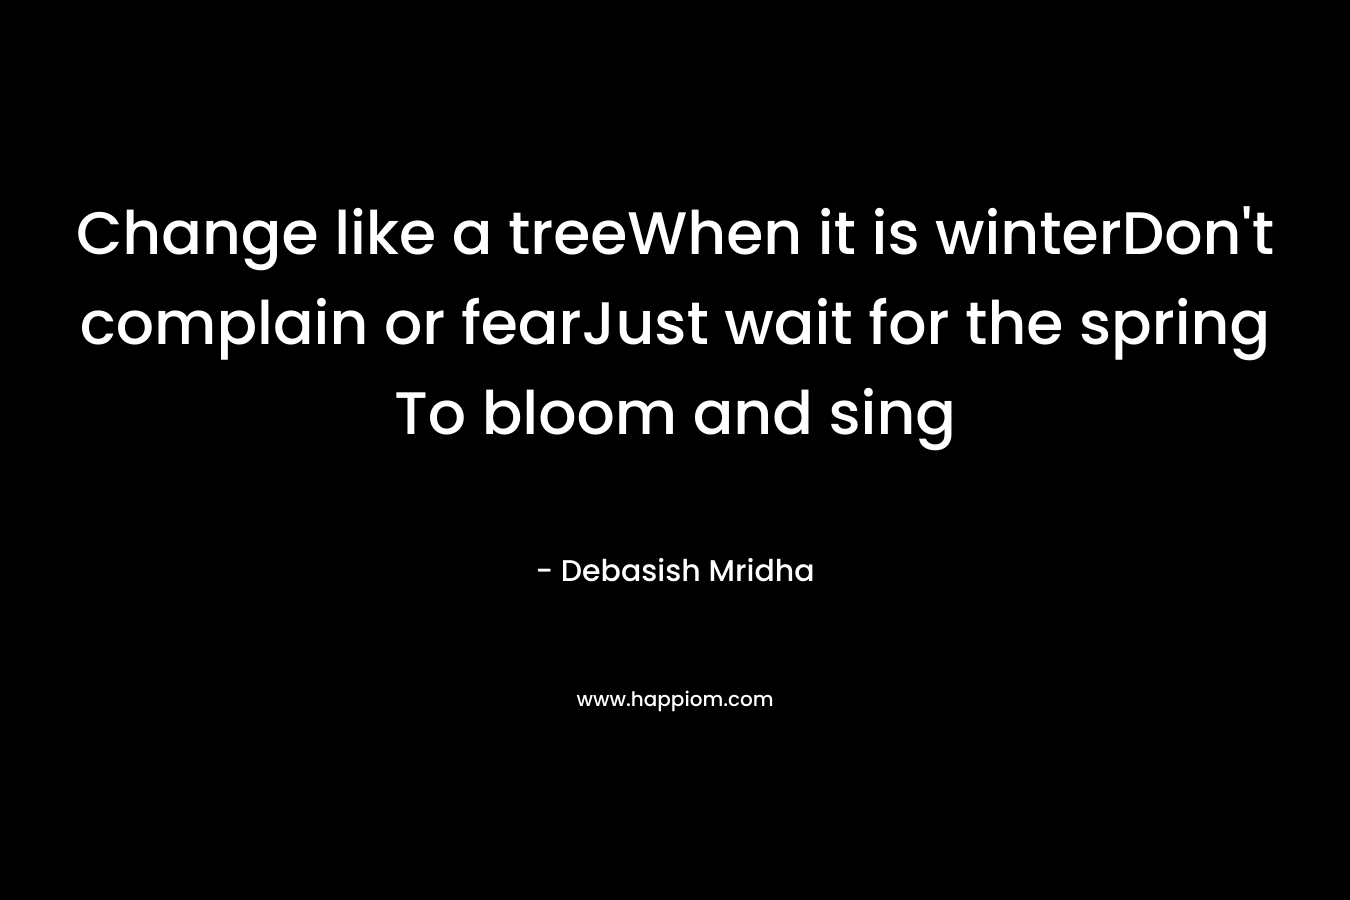 Change like a treeWhen it is winterDon’t complain or fearJust wait for the spring To bloom and sing – Debasish Mridha